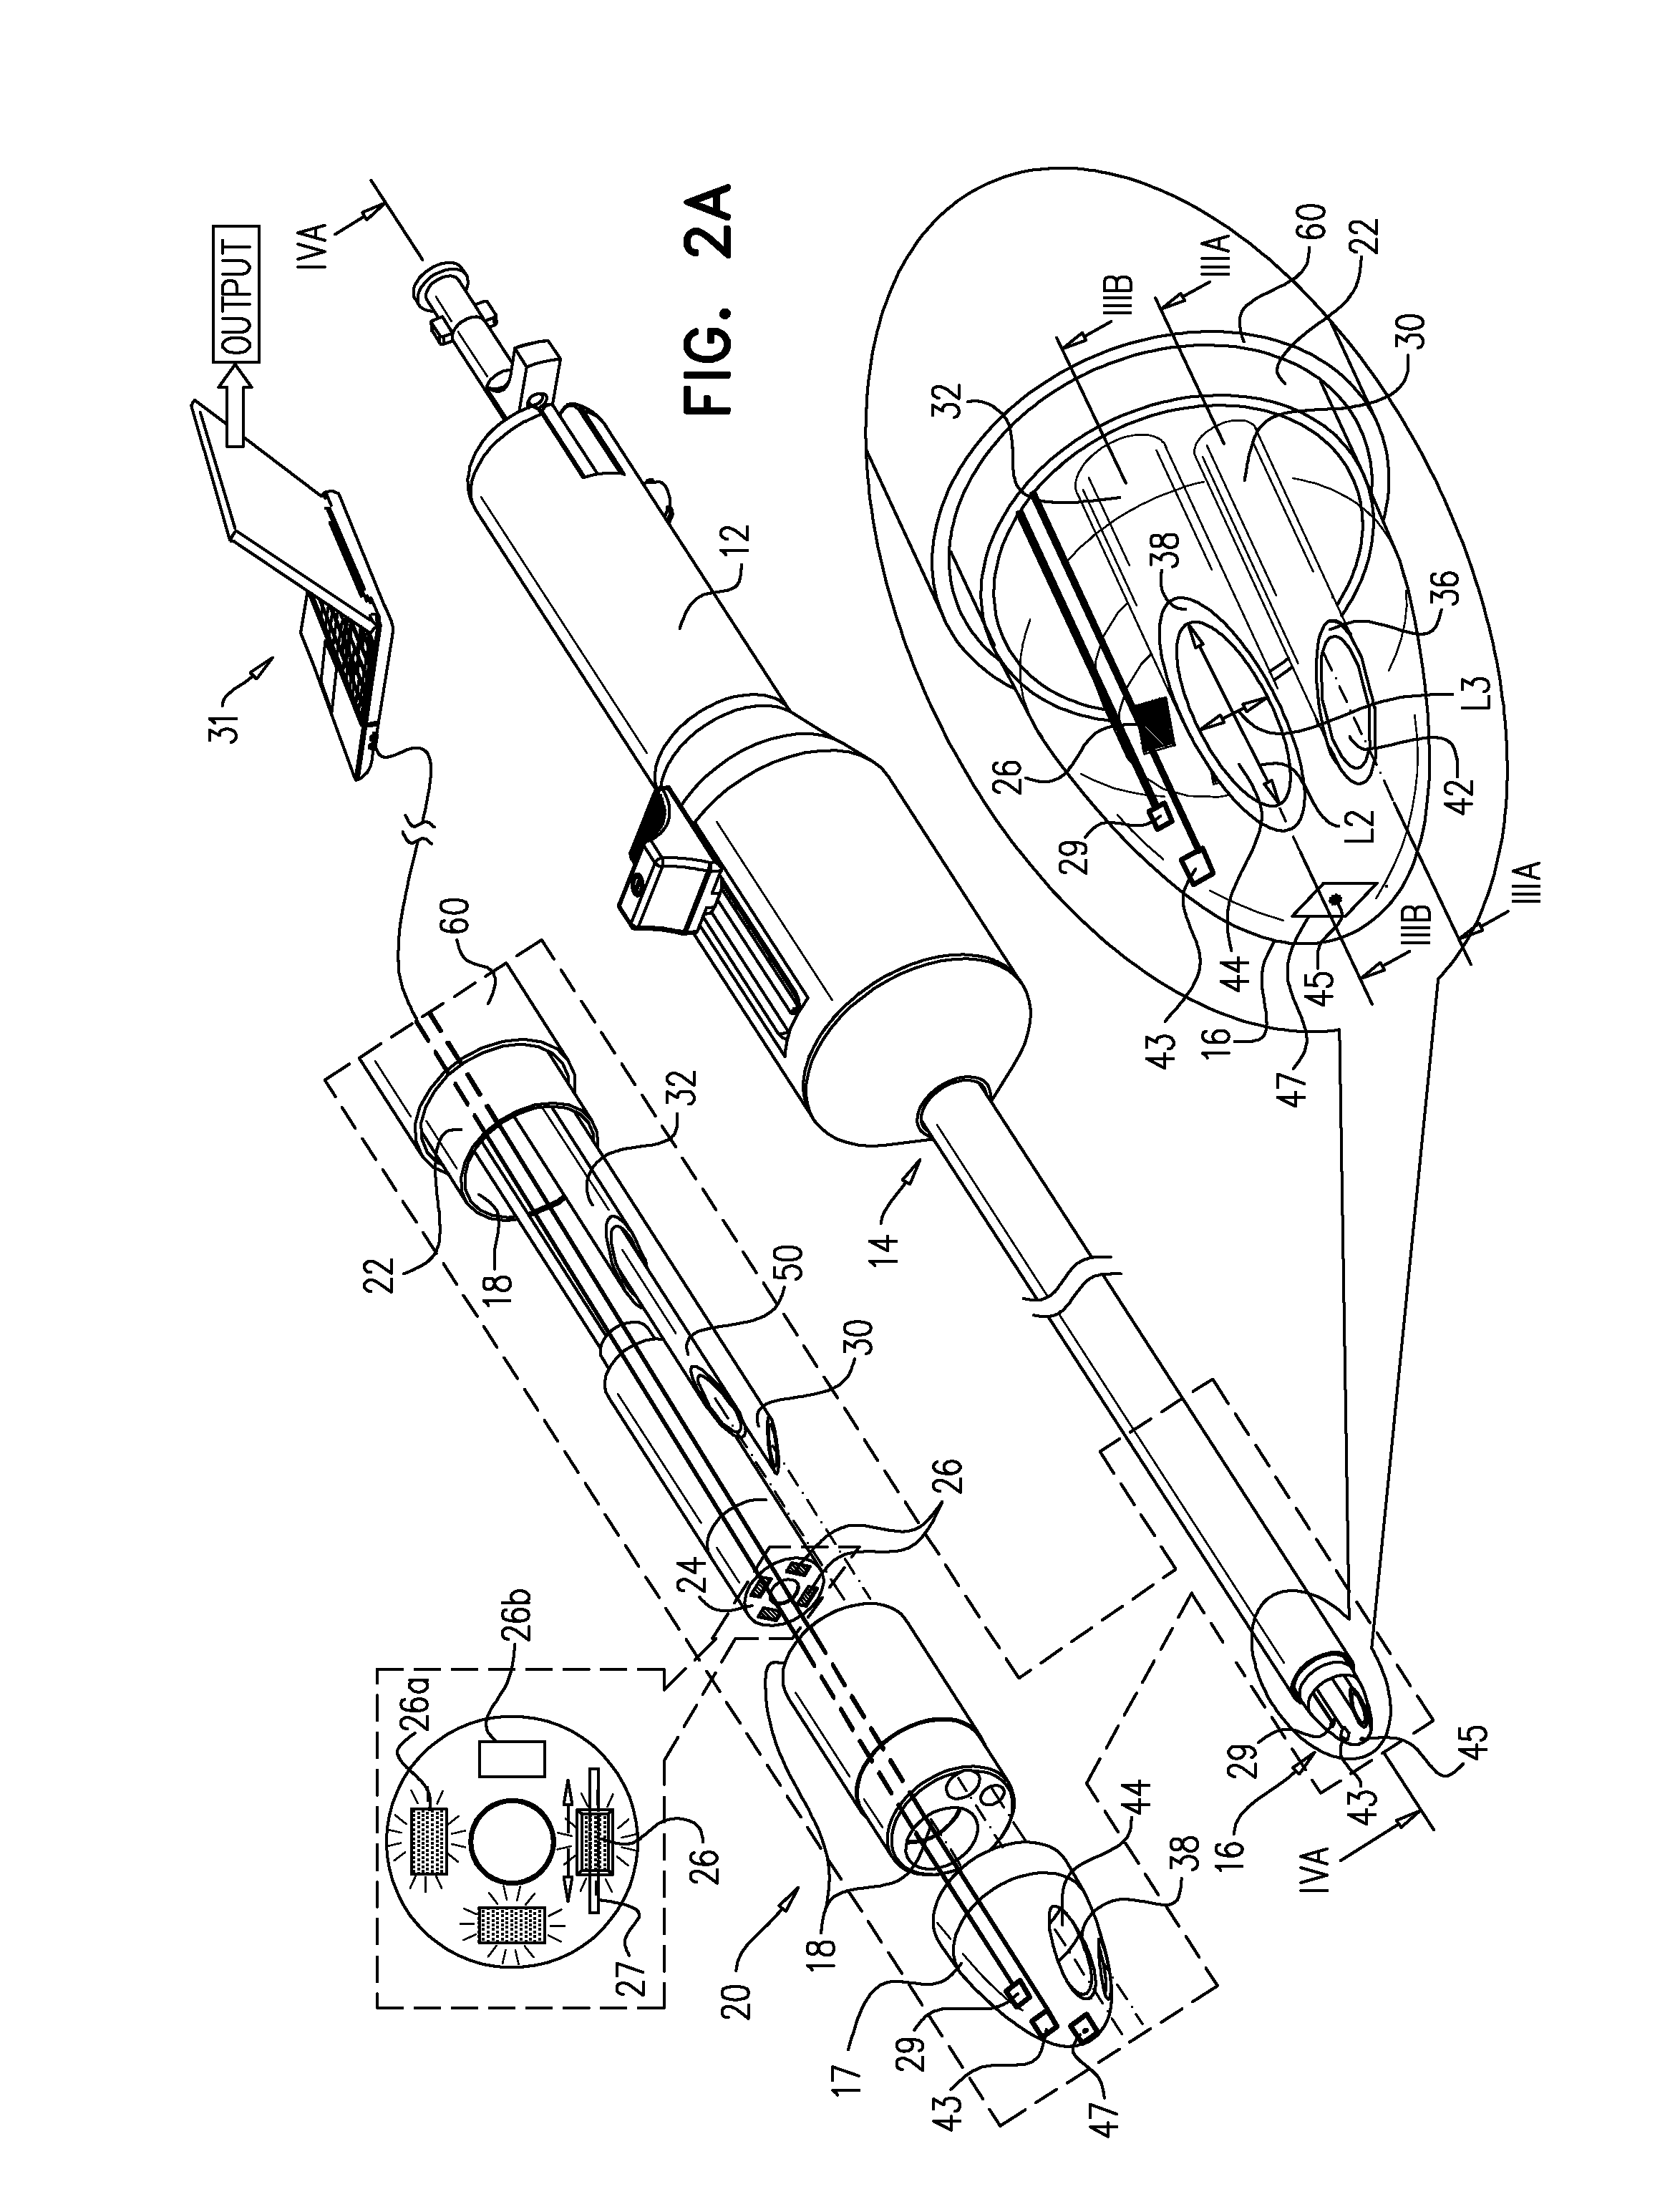 Pericardial access device